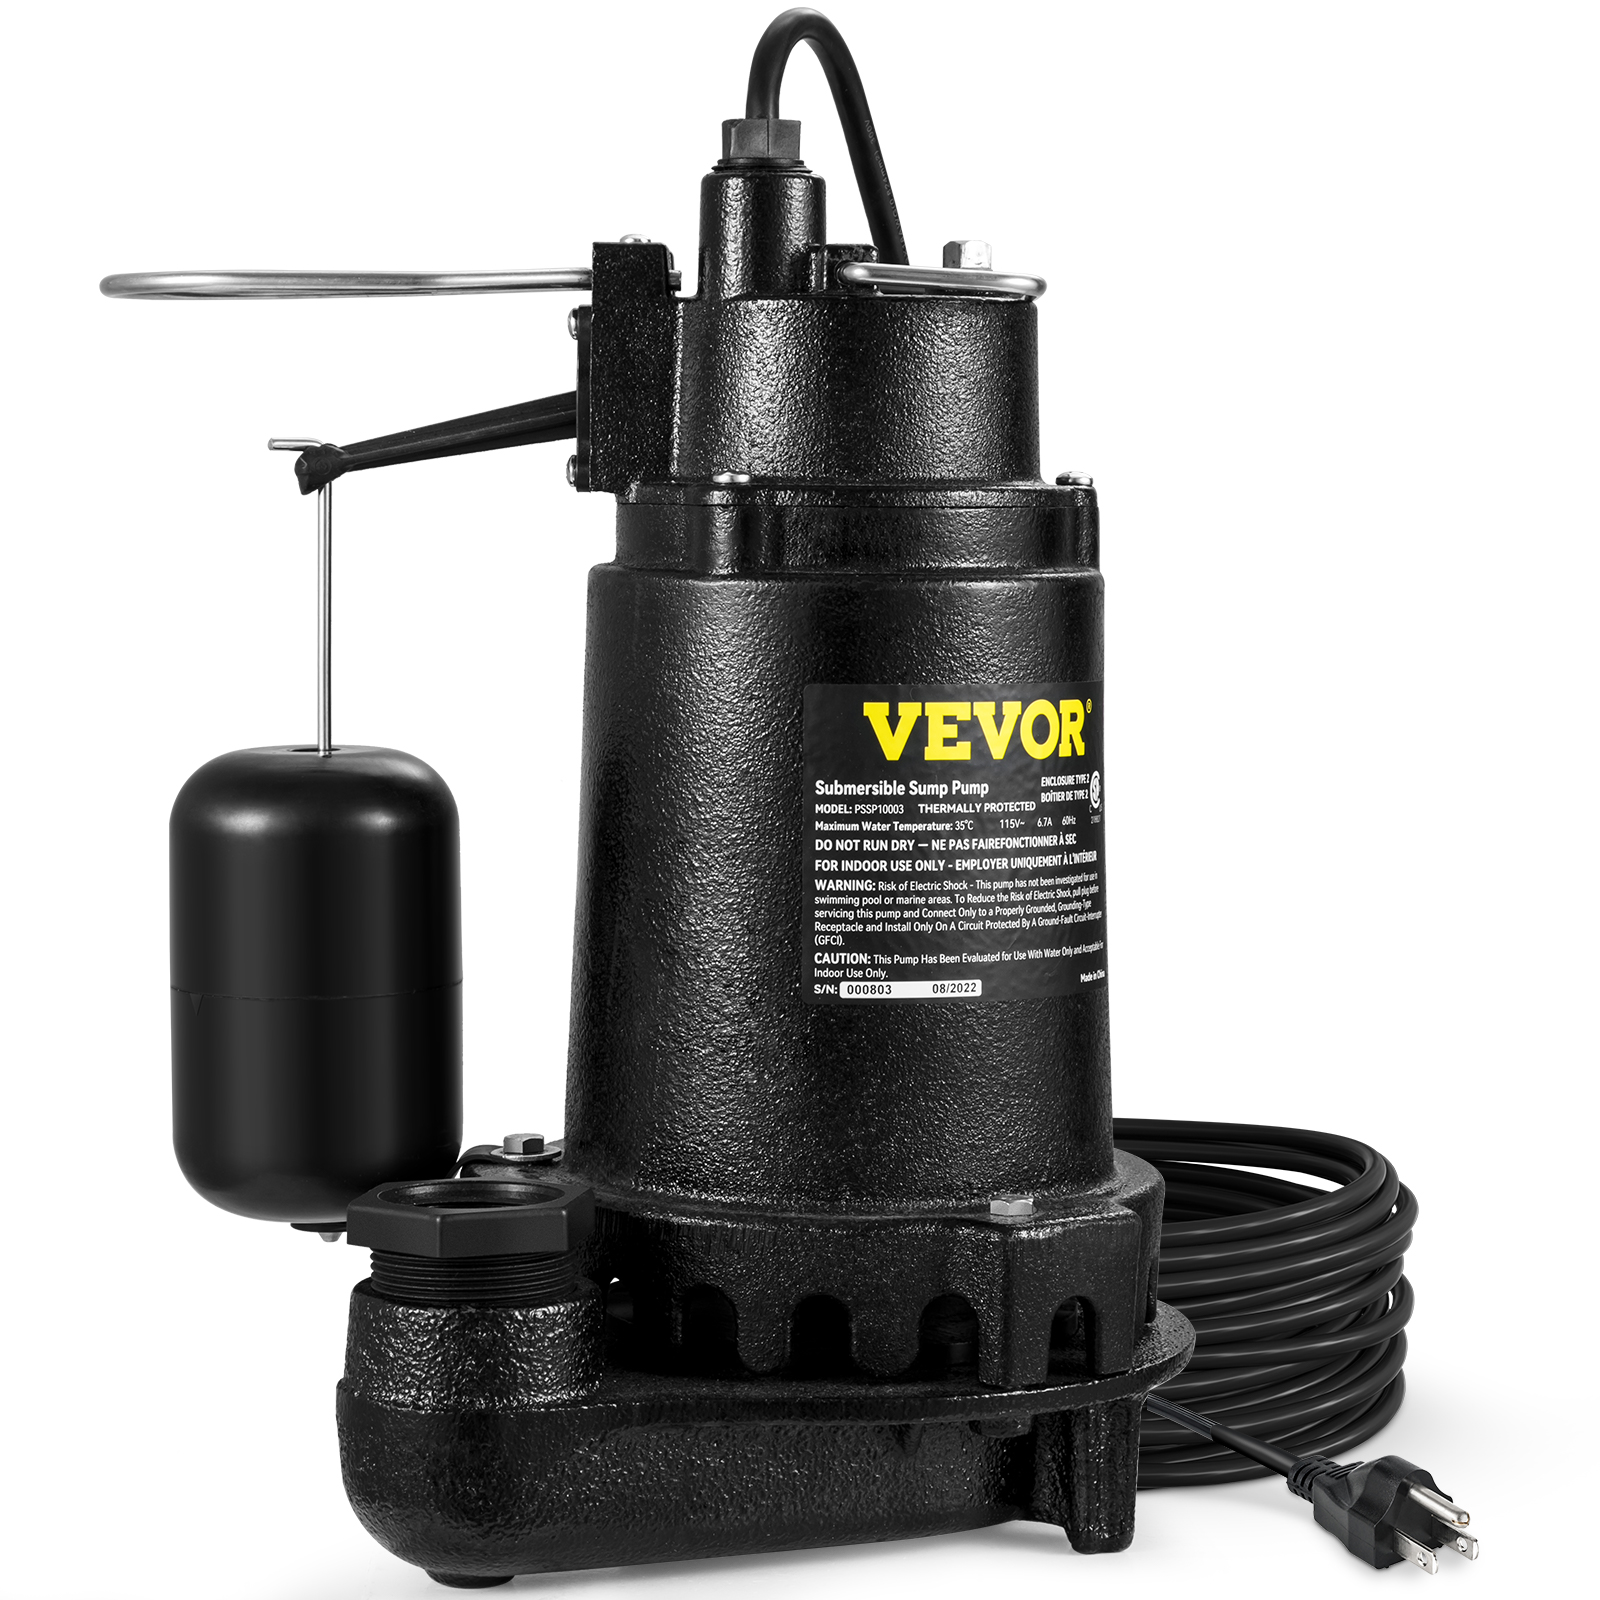 VEVOR 1HP Sewage Pump, 5600 GPH Cast Iron Submersible Sump Pump with Automatic Snap-Action Float Switch, Heavy-Duty Submersible